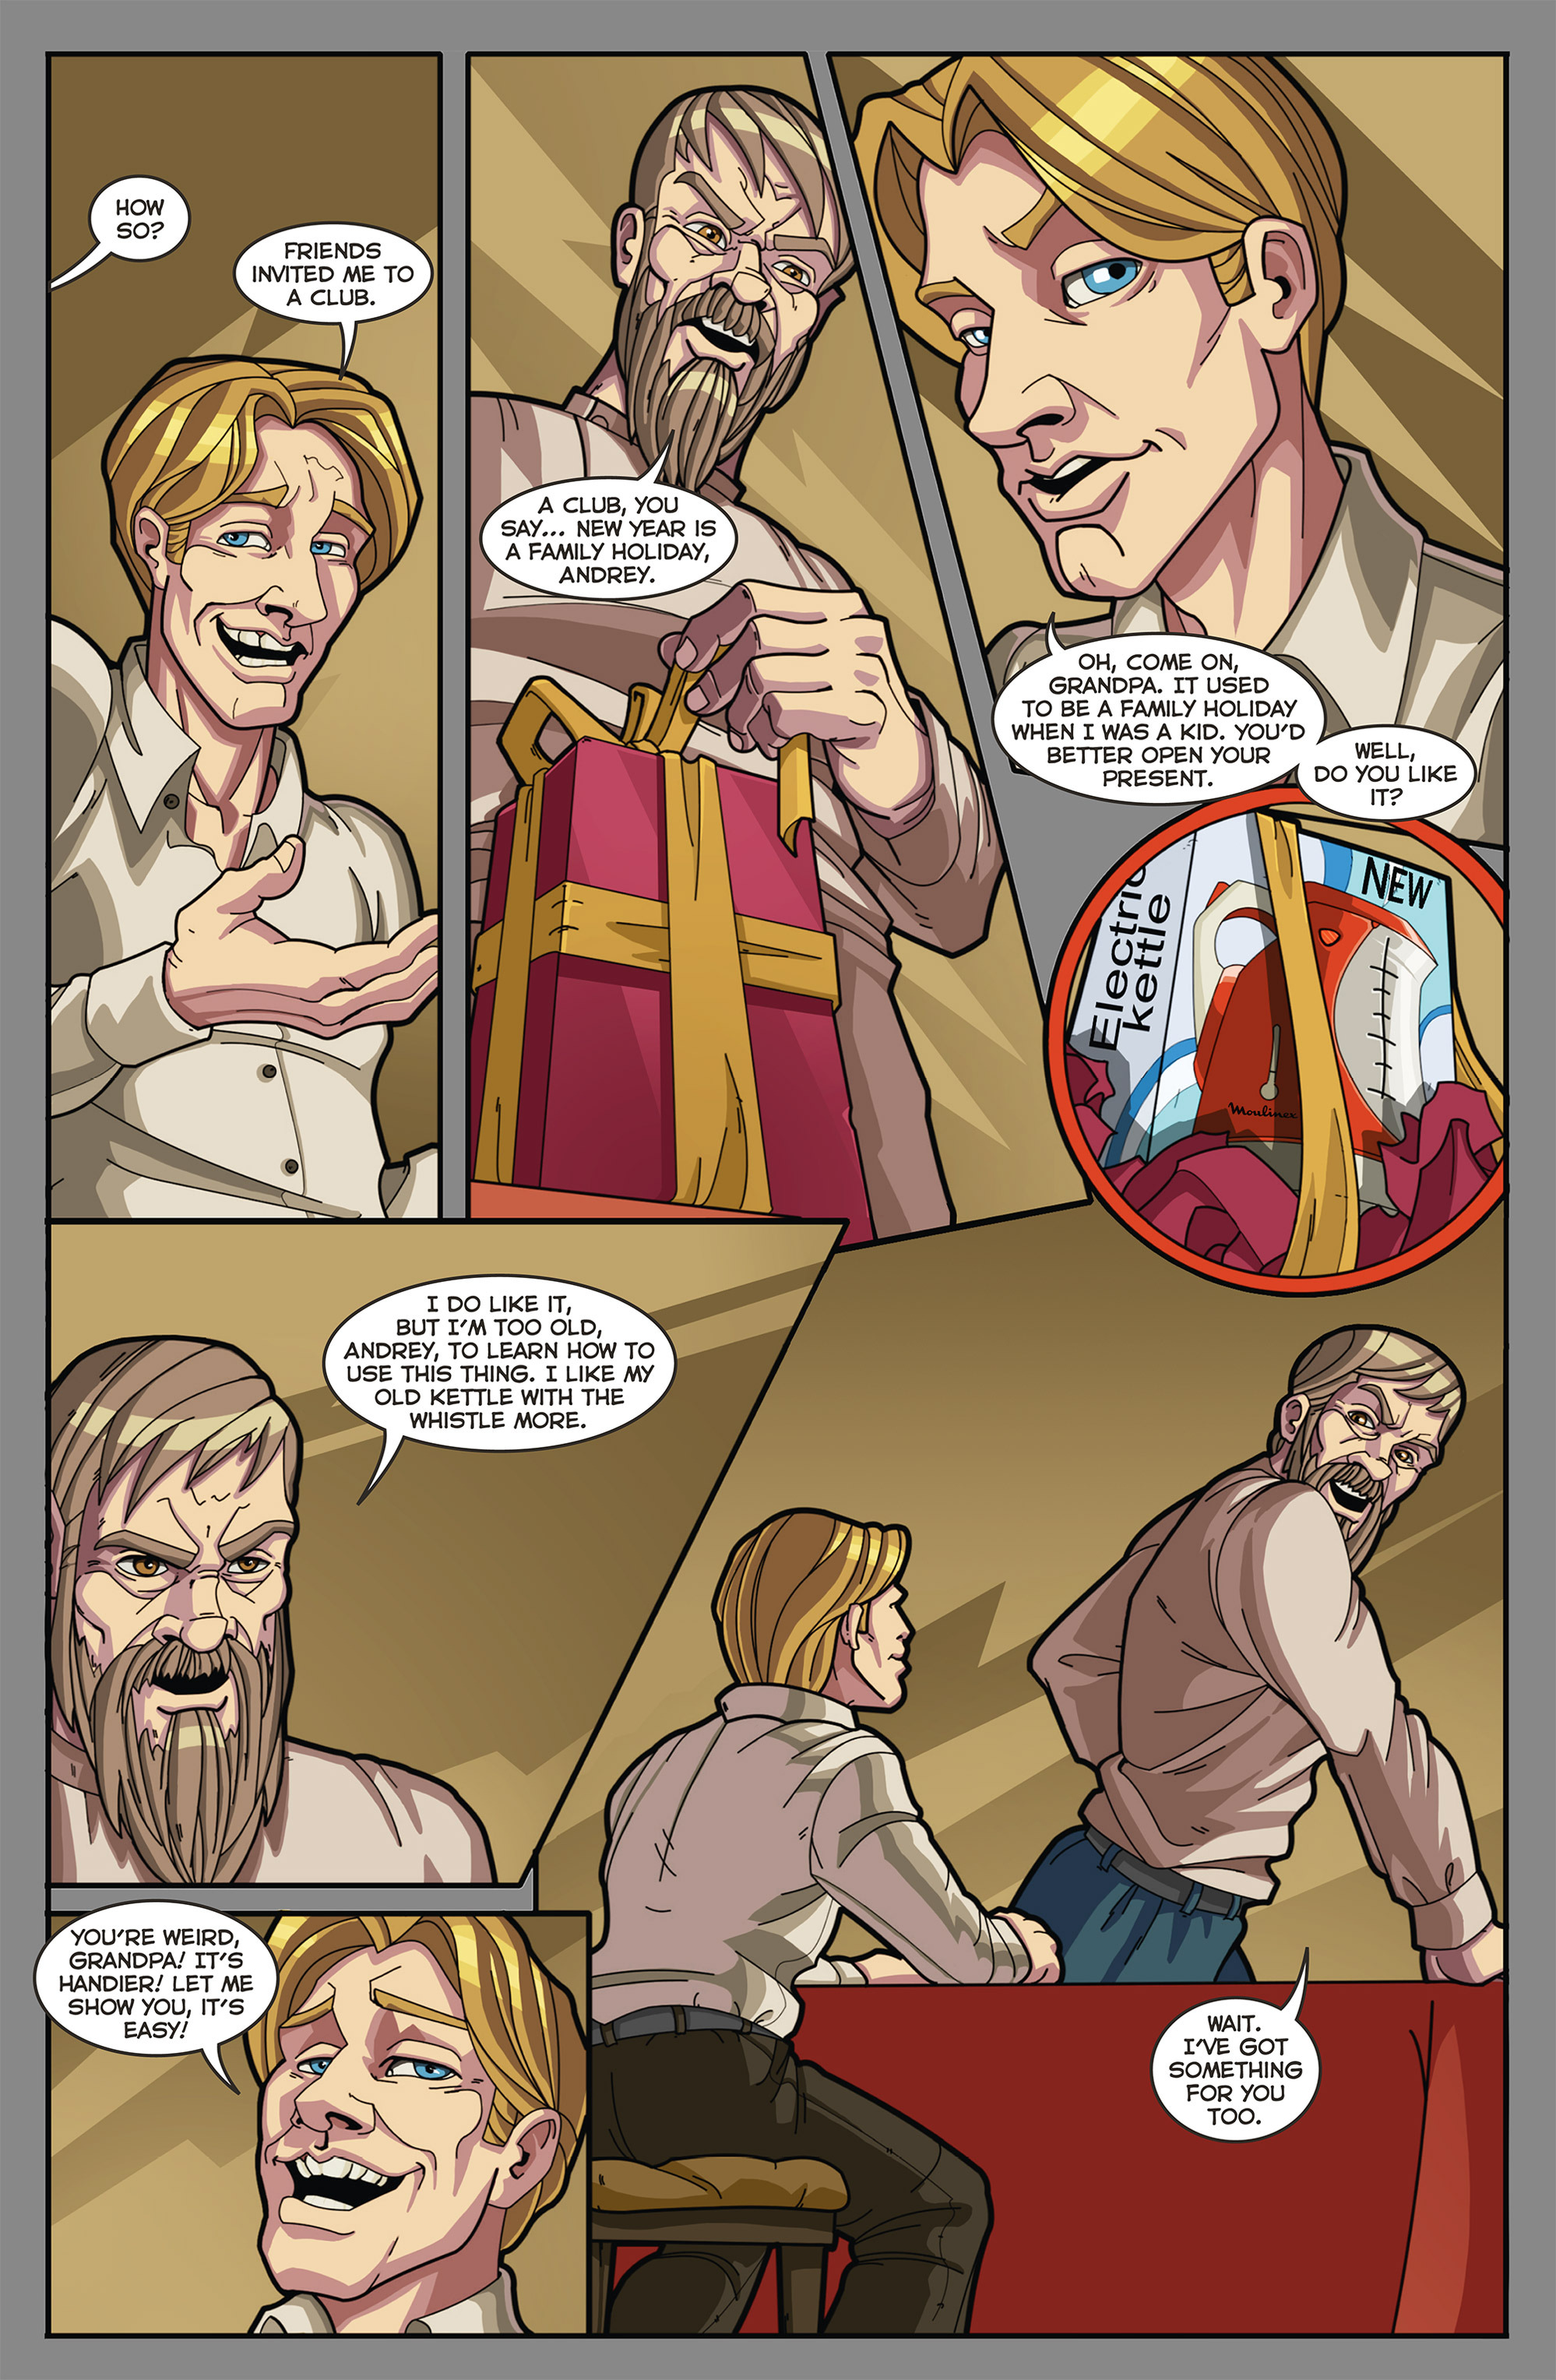 Read online Friar comic -  Issue #4 - 6